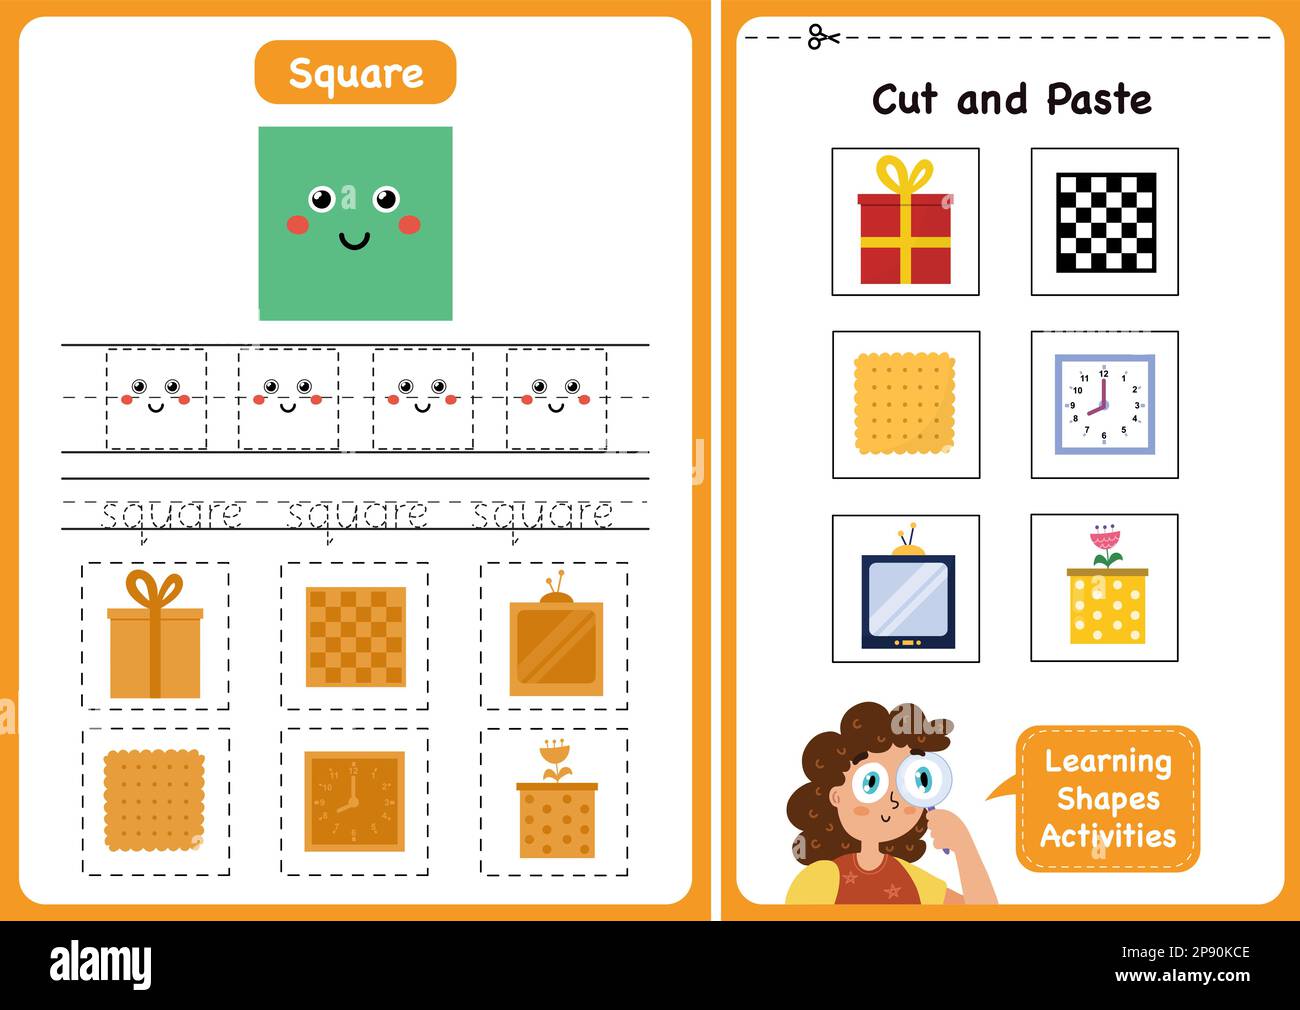 Learning shapes activity page - Square. Geometric shapes worksheets for kids Stock Vector